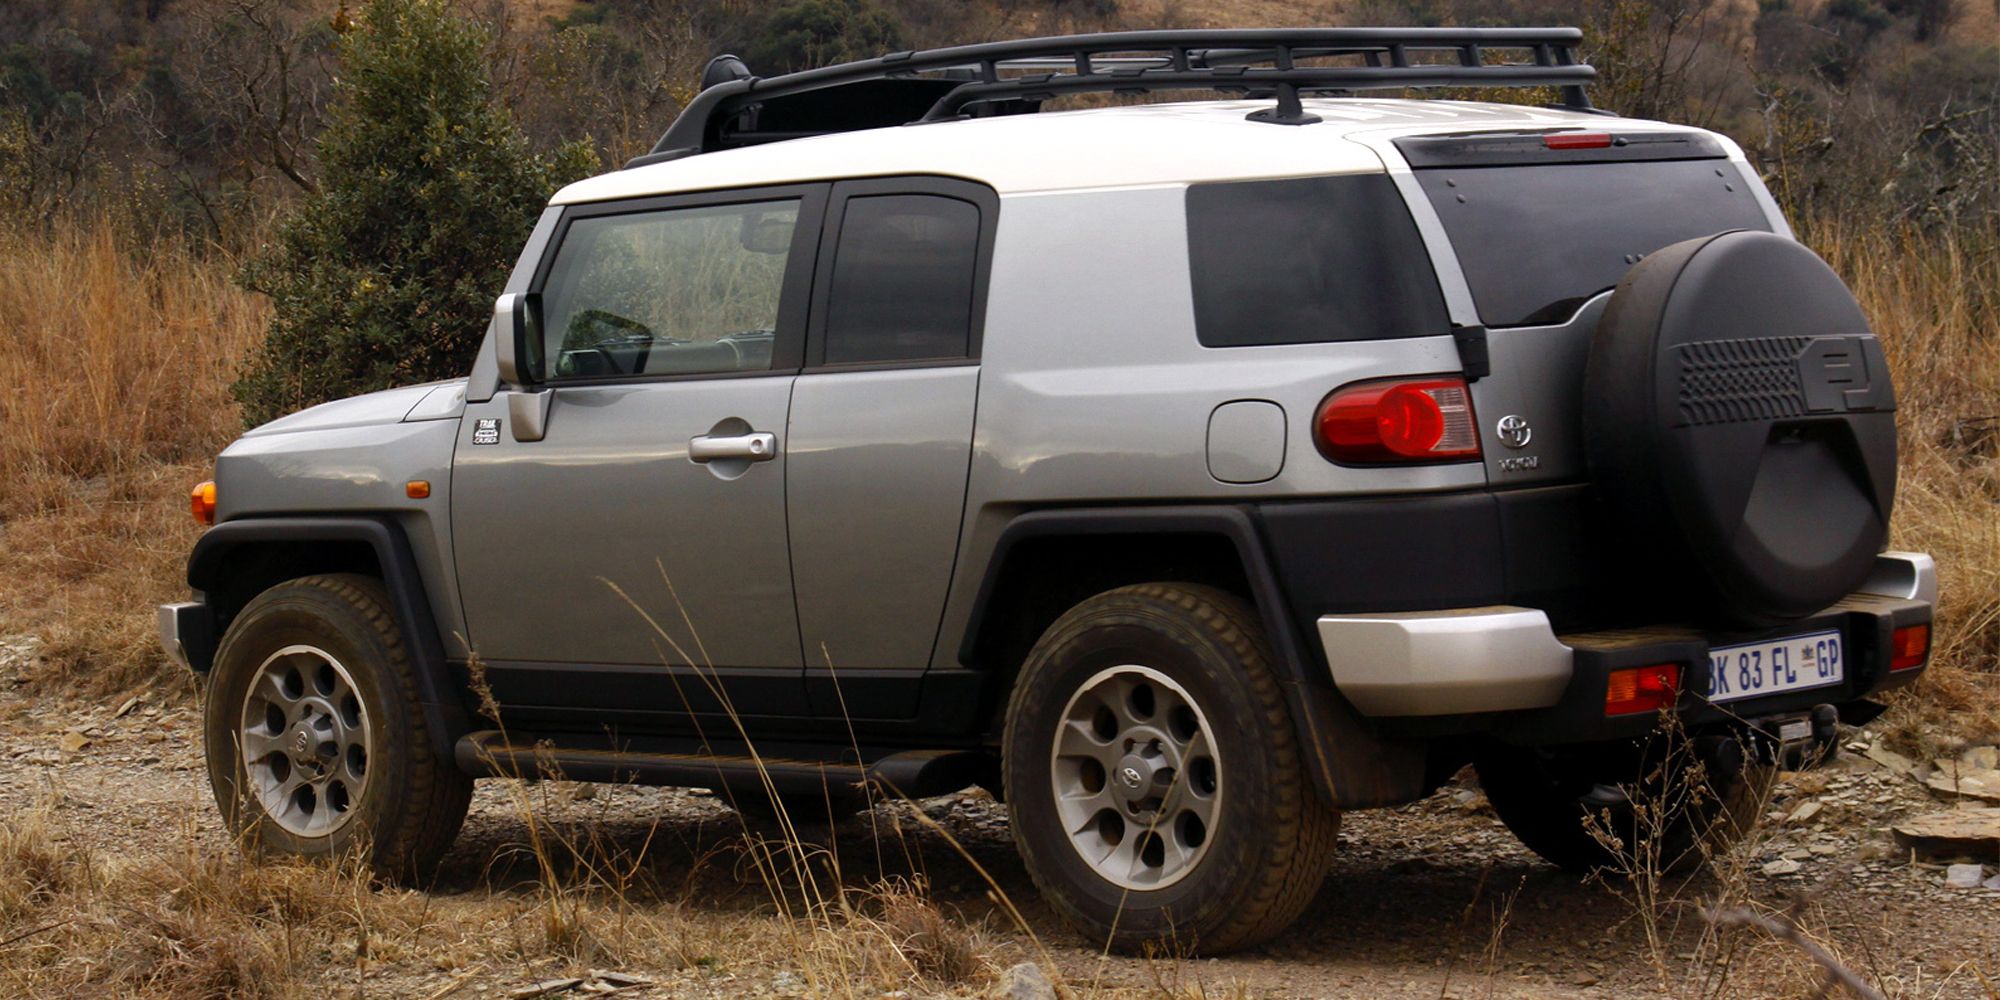 Rear 3/4 view of the FJ Cruiser offroading